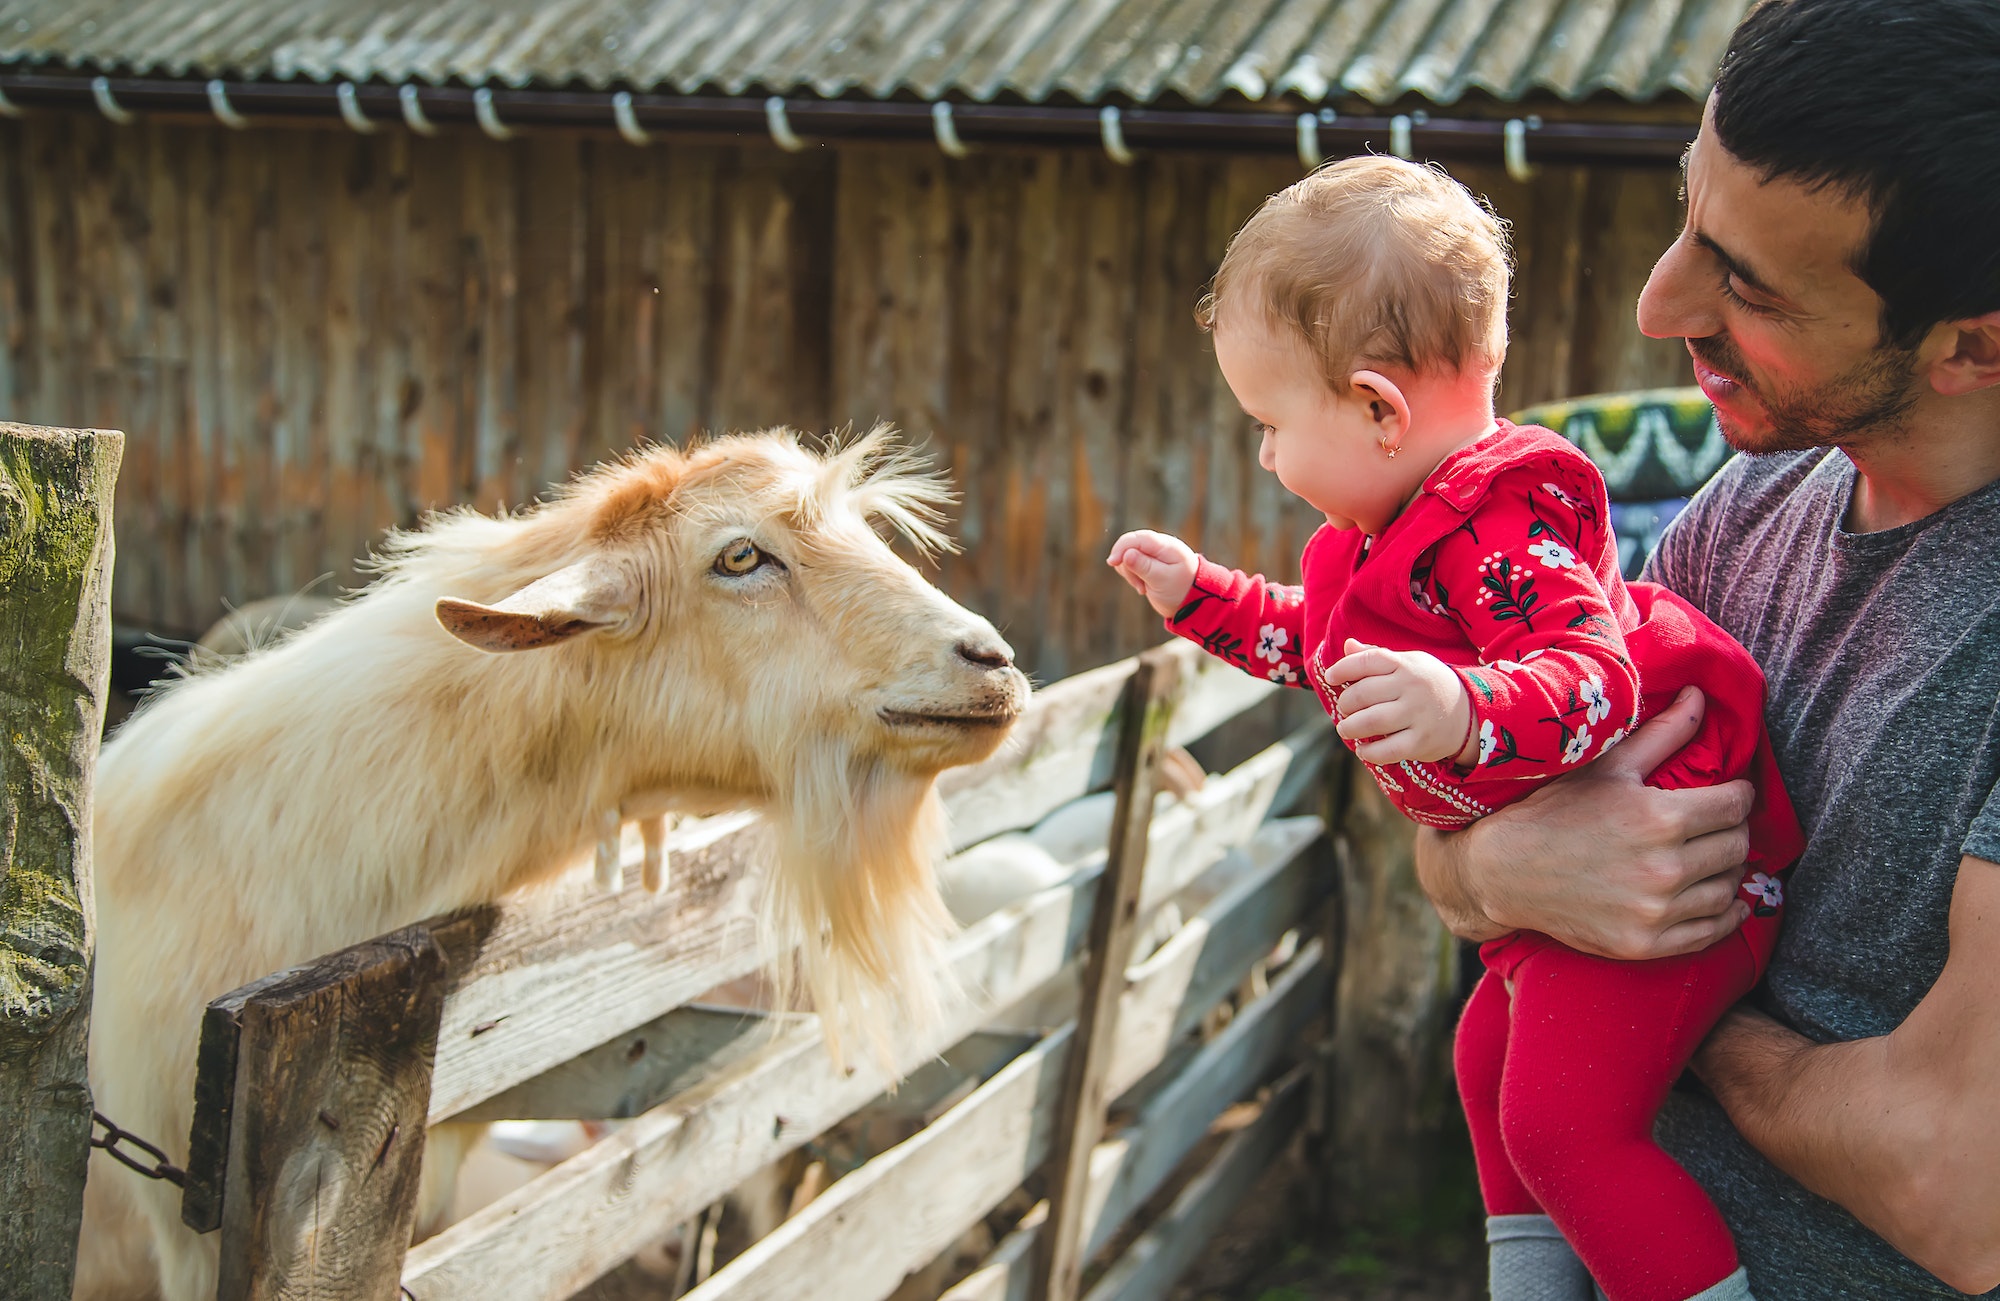 Baby petting a goat on the farm. Selective focus.